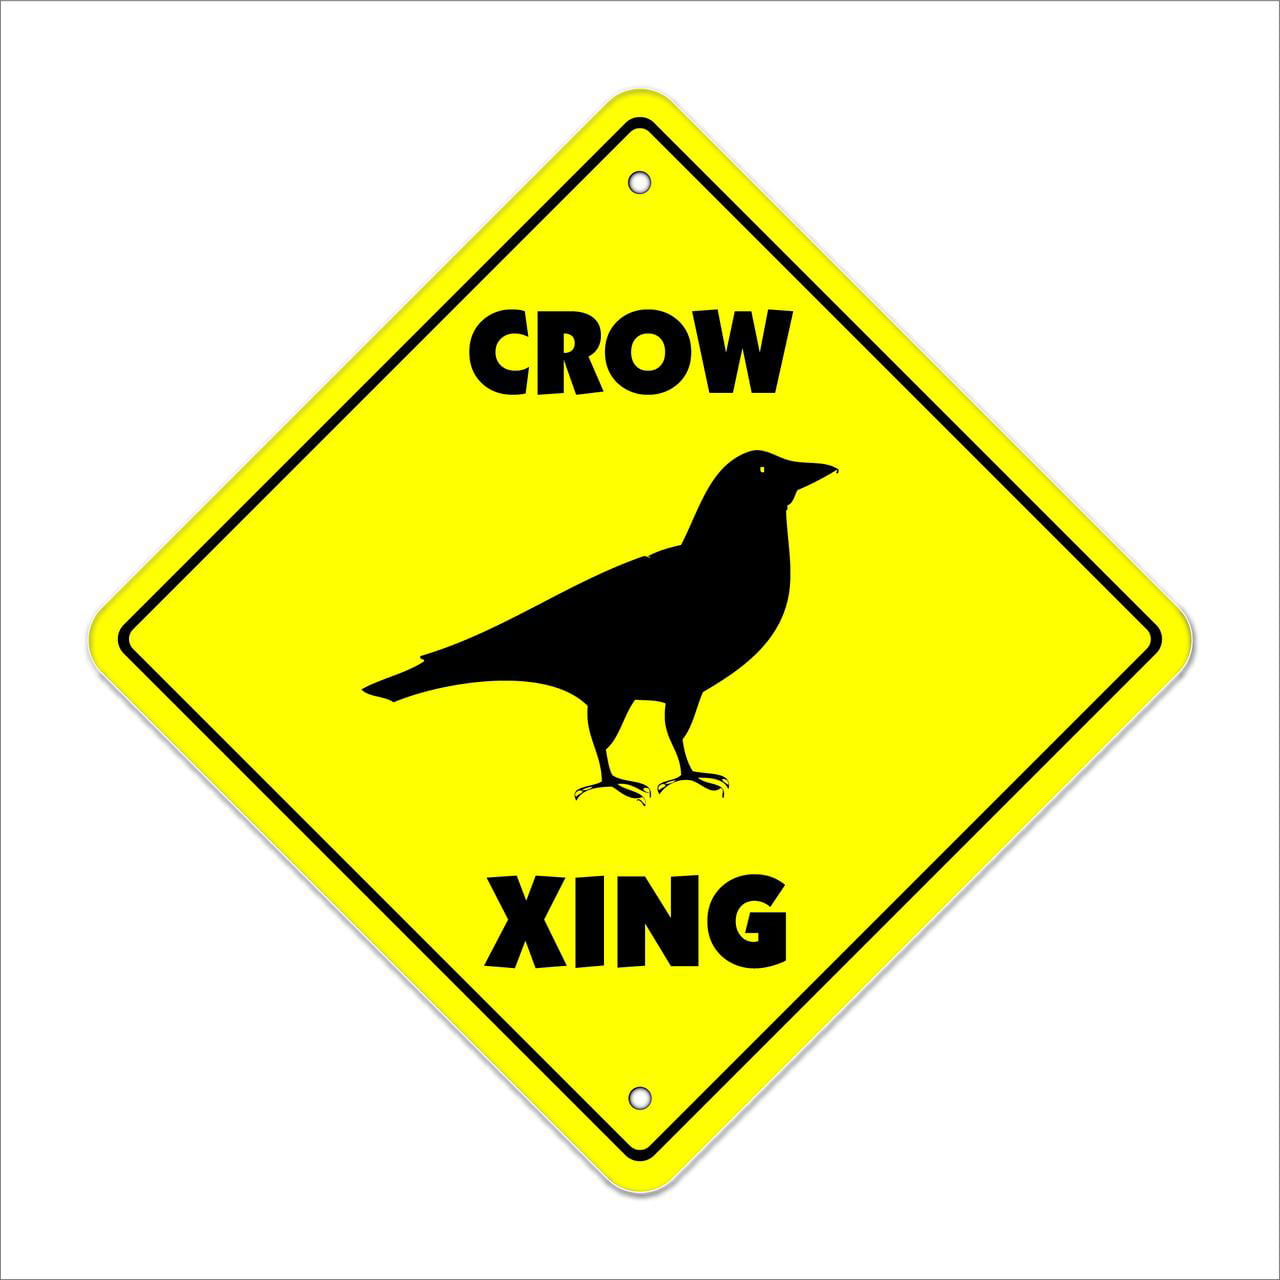 Crow Crossing Decal Zone Xing Tall black bird eat scare fly recipe 